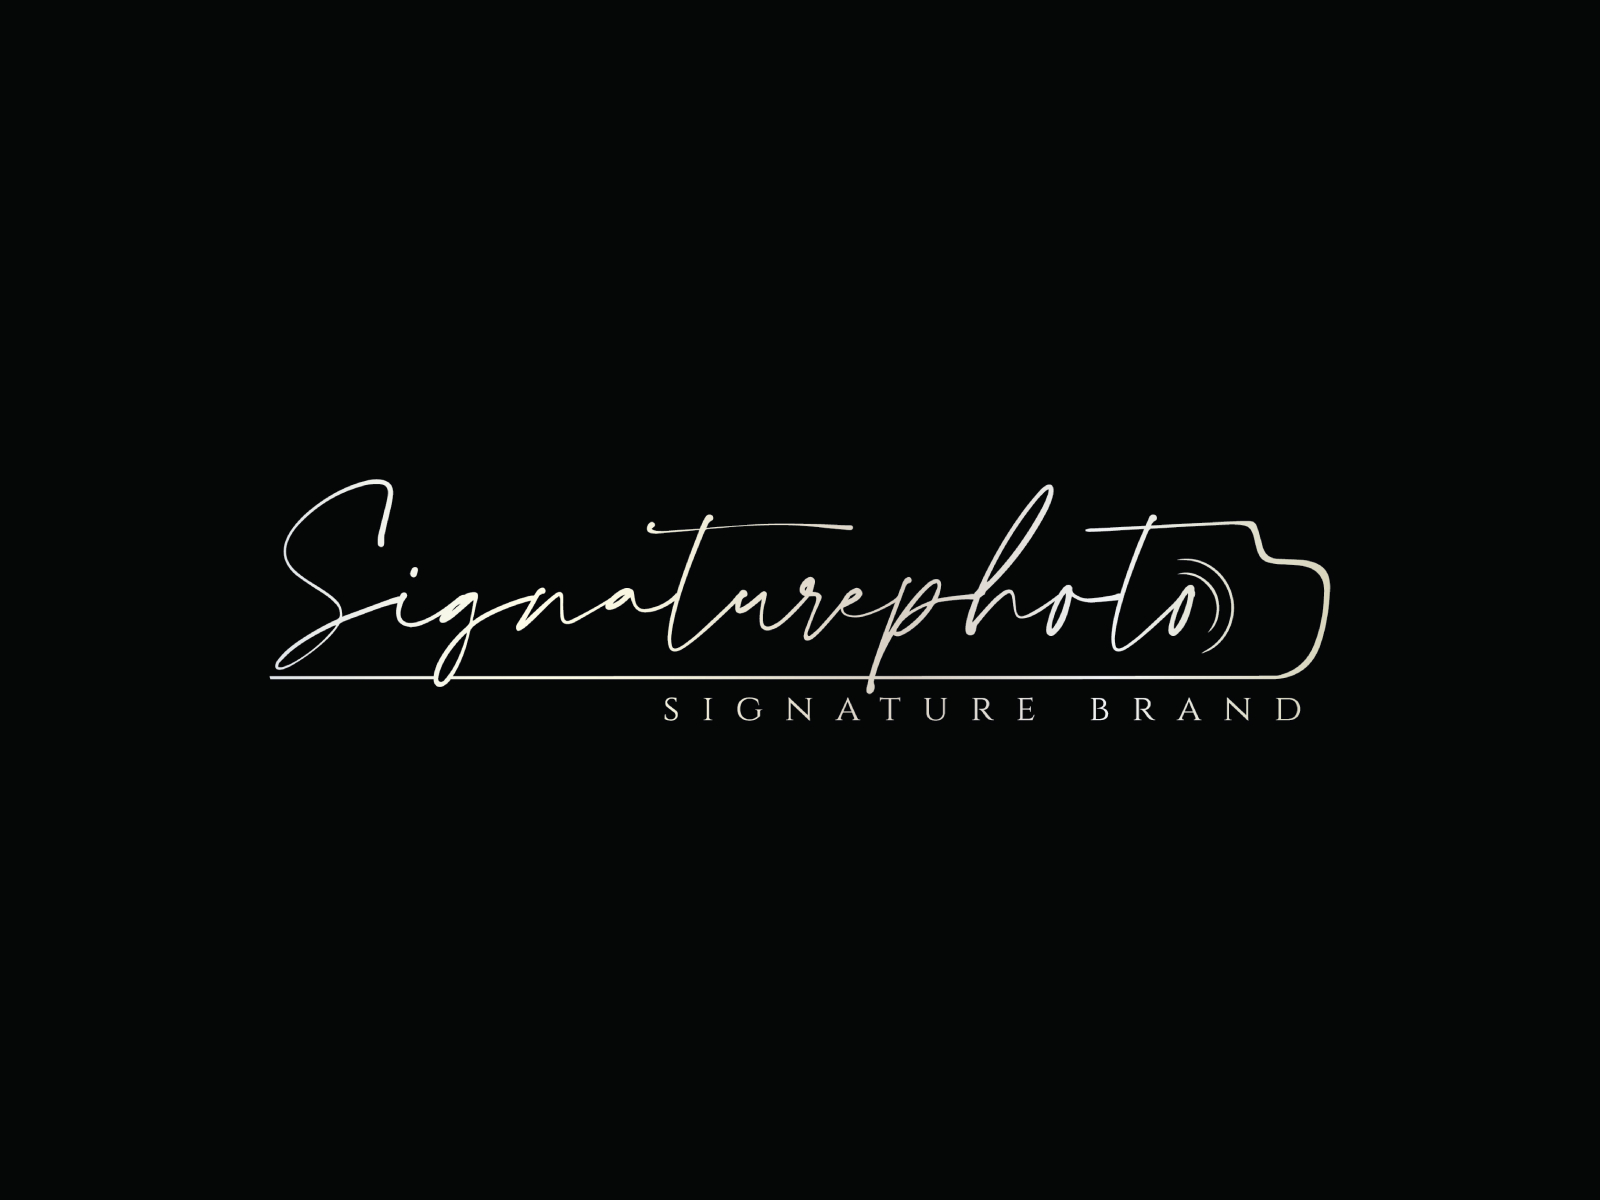 Signature logo by badhan666 on Dribbble